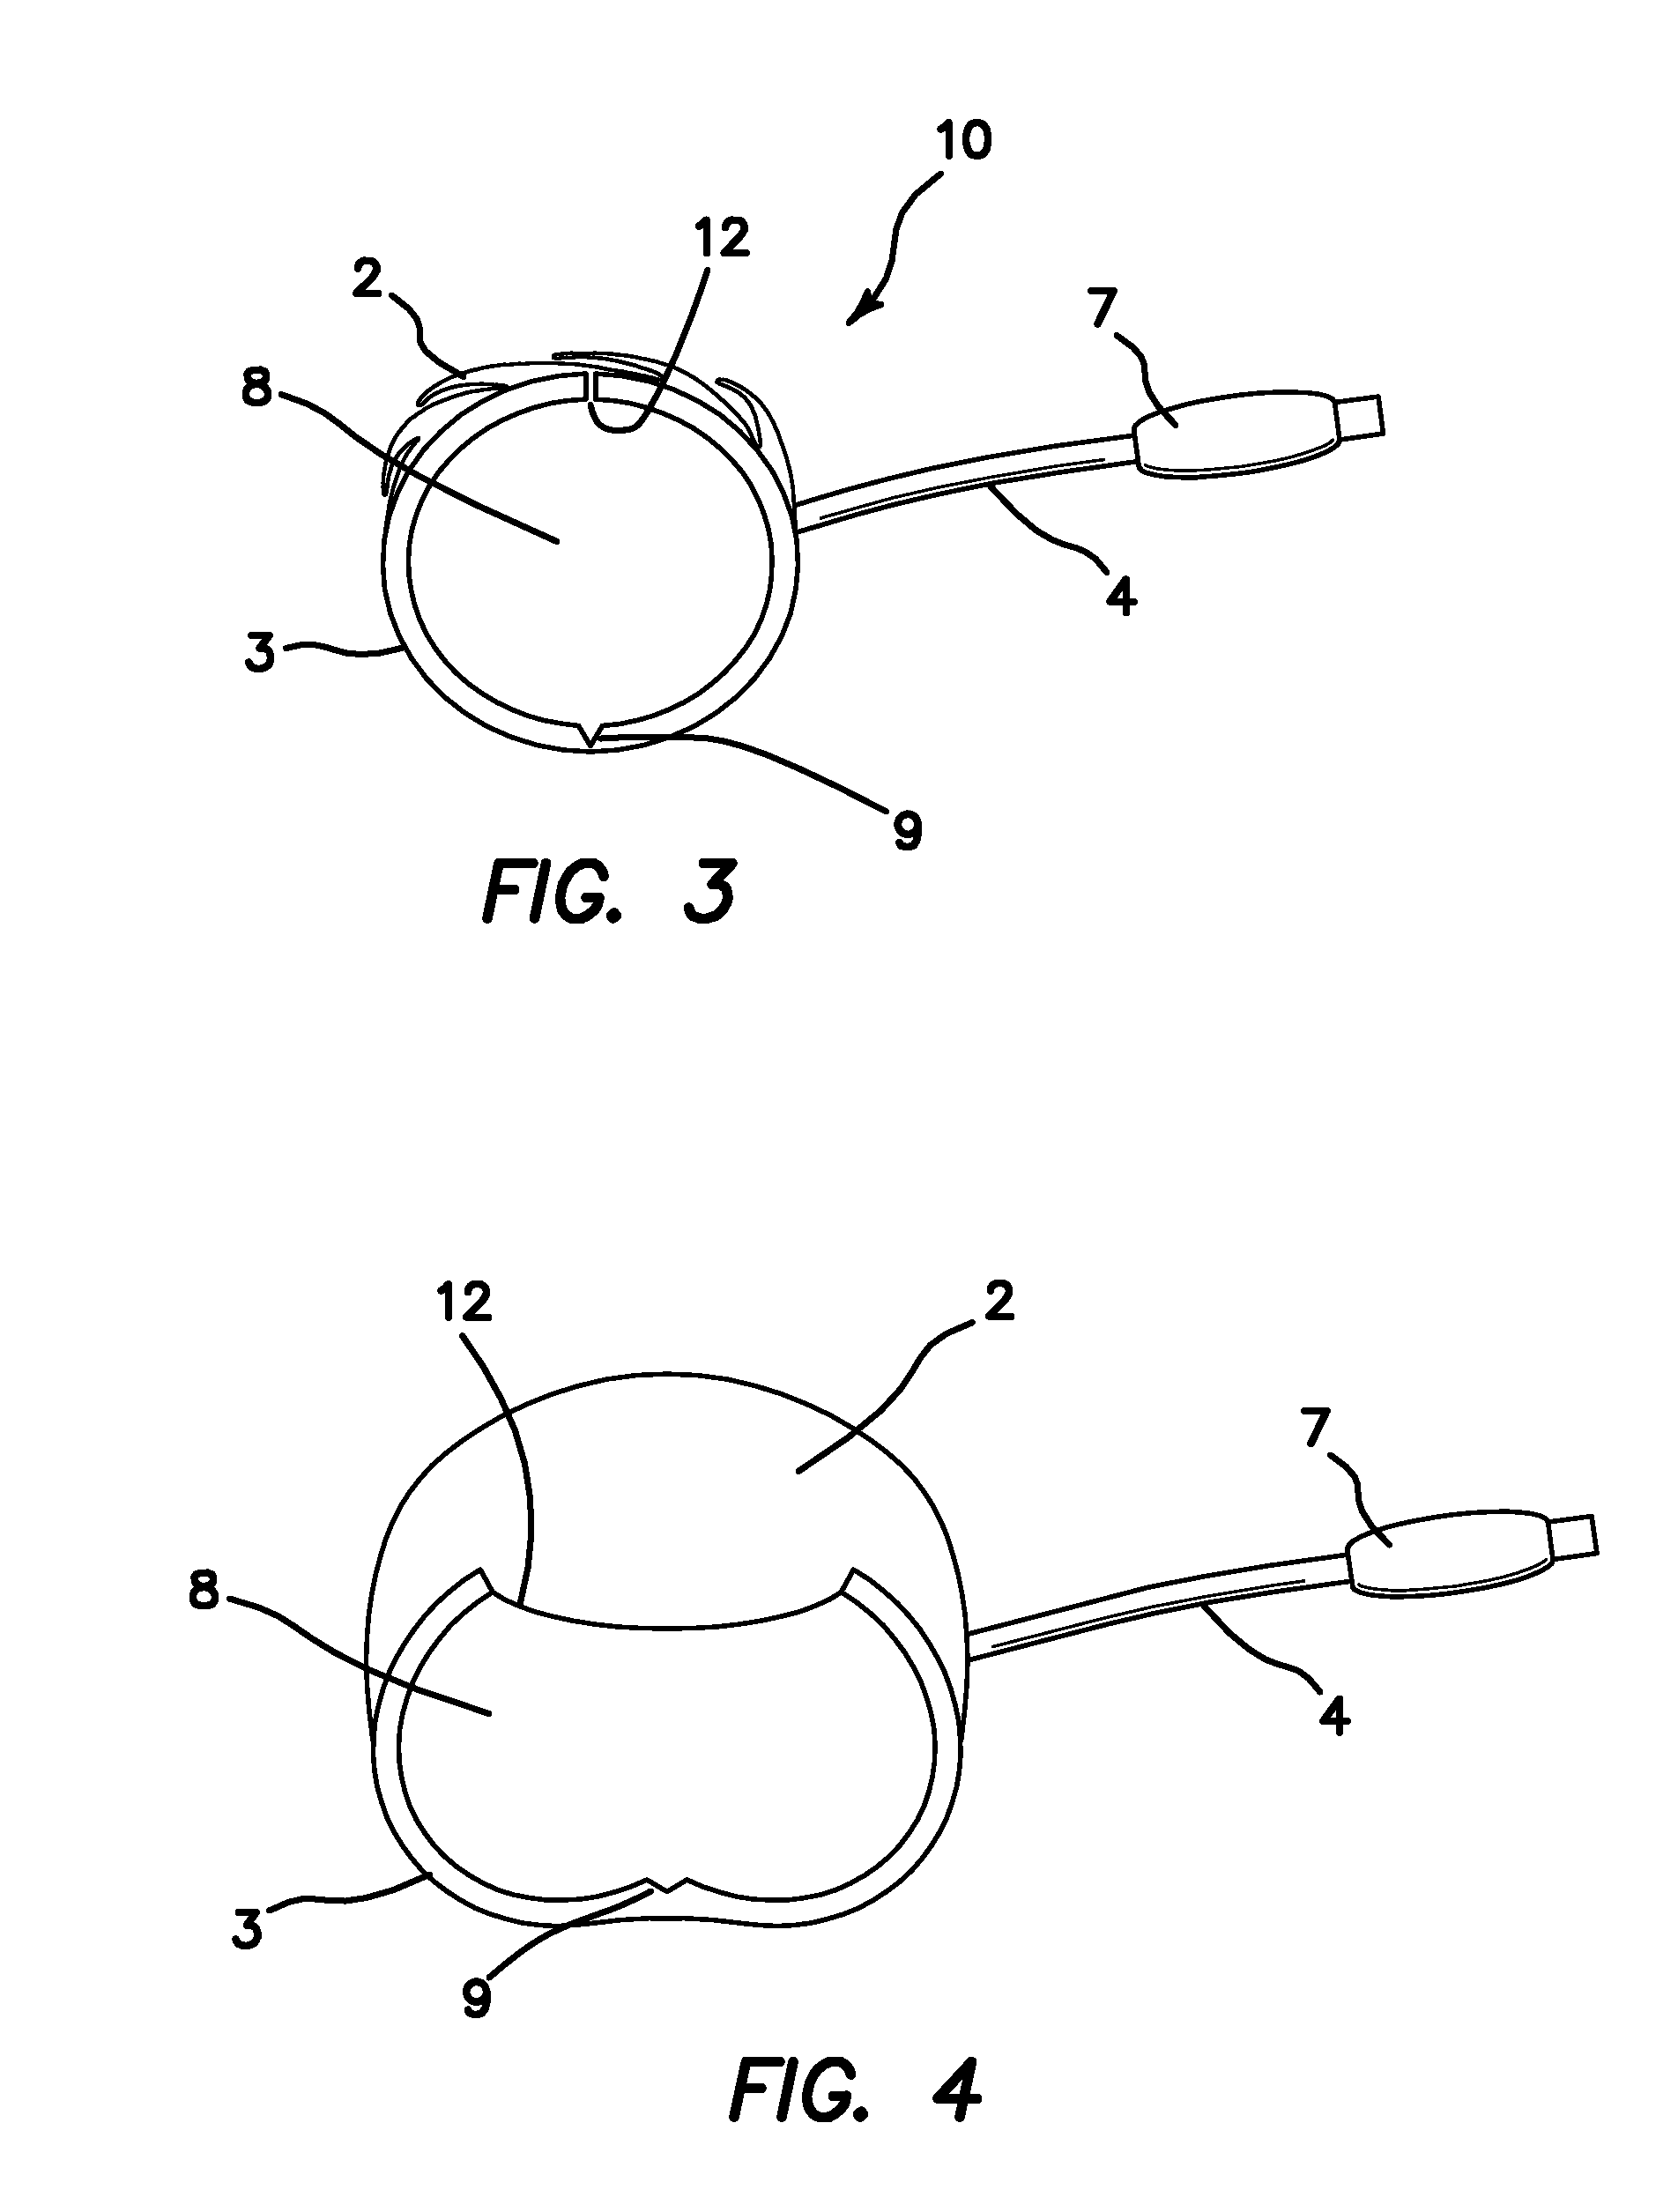 Inflatable Oral Airway Apparatus and Method for Using the Same